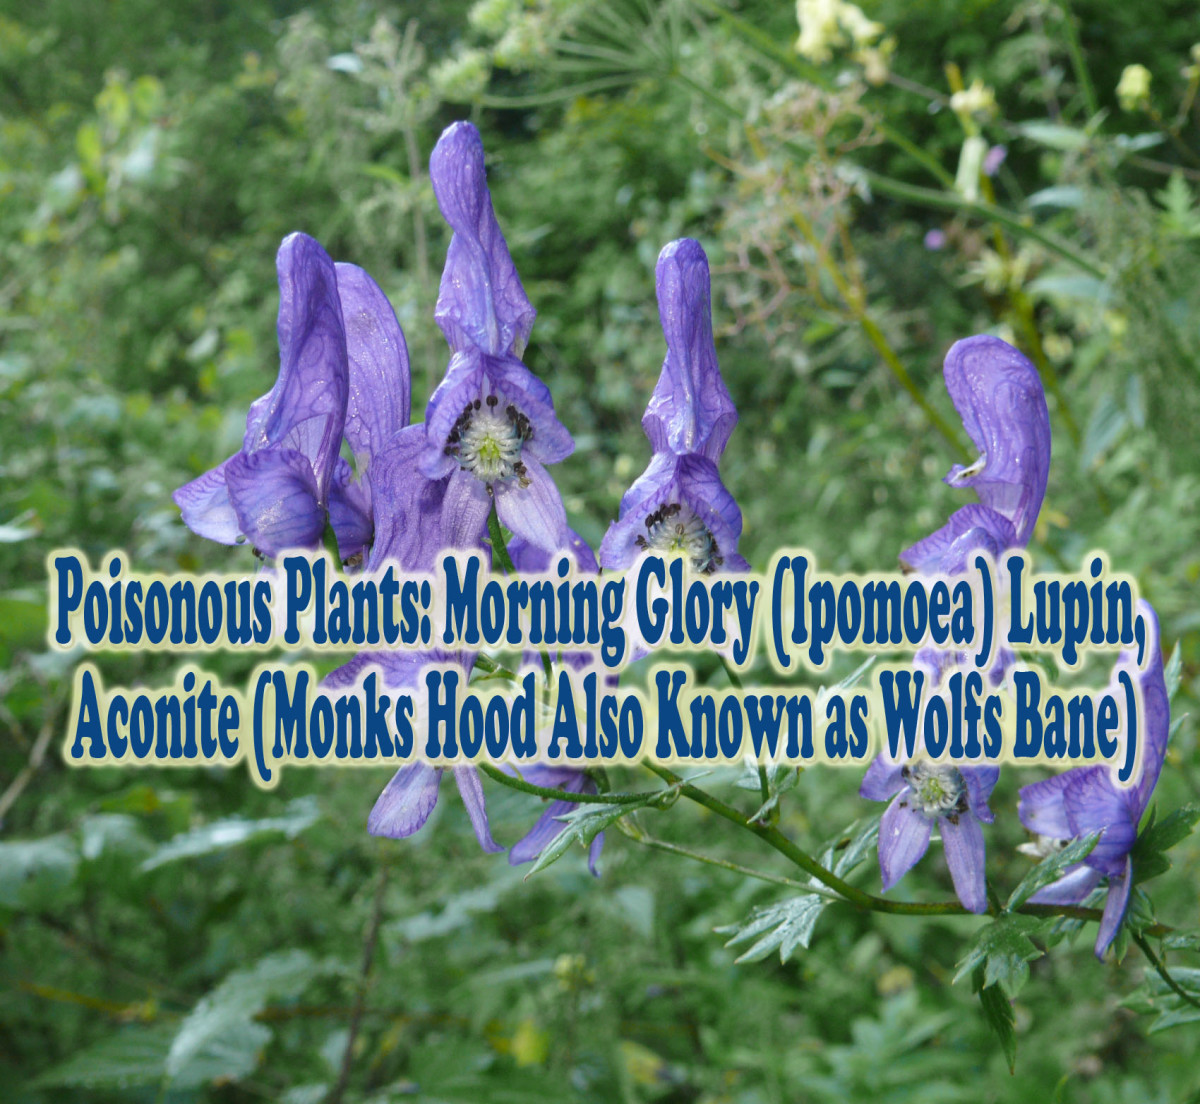 Poisonous Plants: Morning Glory (Ipomoea) Lupin (Lupini), Aconite (Monks Hood Also Known as Wolfs Bane)